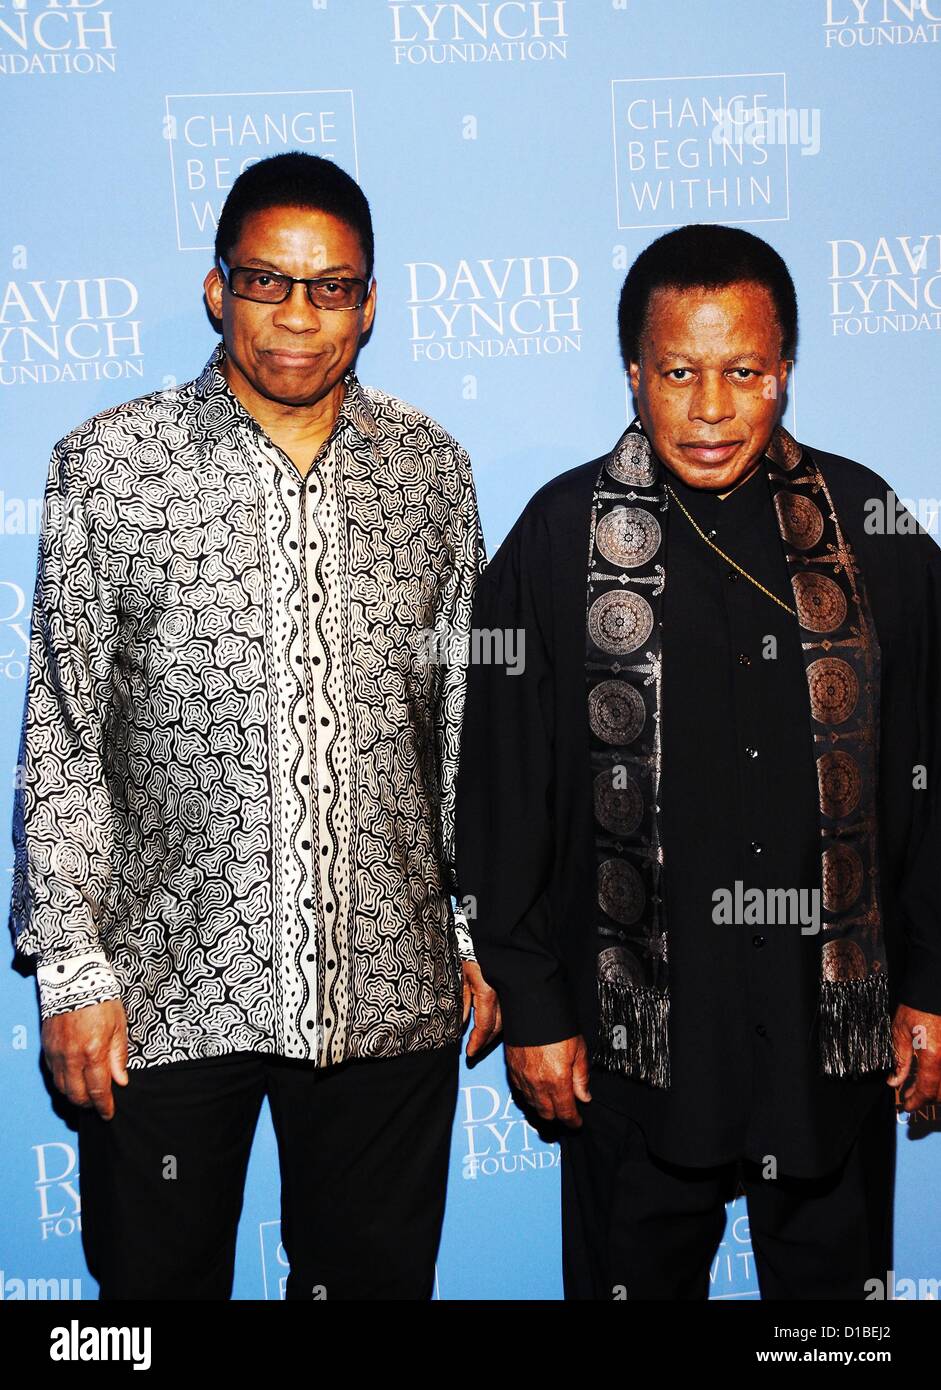 Herbie Hancock, Wayne Shorter at arrivals for Change Begins Within Benefit Gala Benefiting the David Lynch Foundation, Frederick P. Rose Hall, Jazz at Lincoln Center, New York, NY December 13, 2012. Photo By: Desiree Navarro/Everett Collection/Alamy live news. USA.  Stock Photo